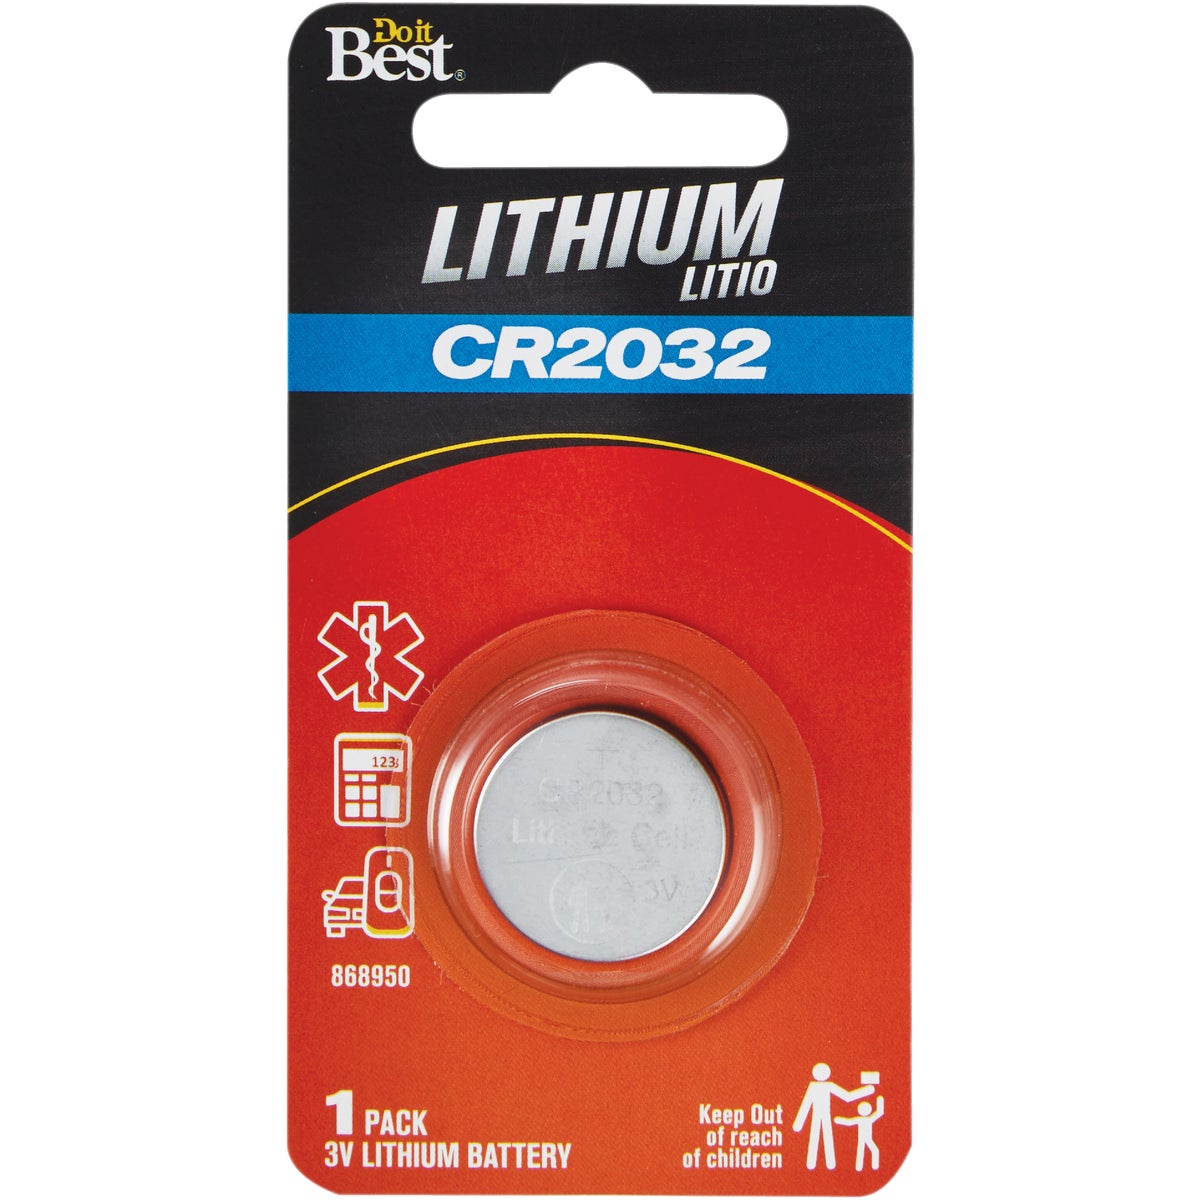 Do it Best CR2032 Lithium Coin Cell Battery